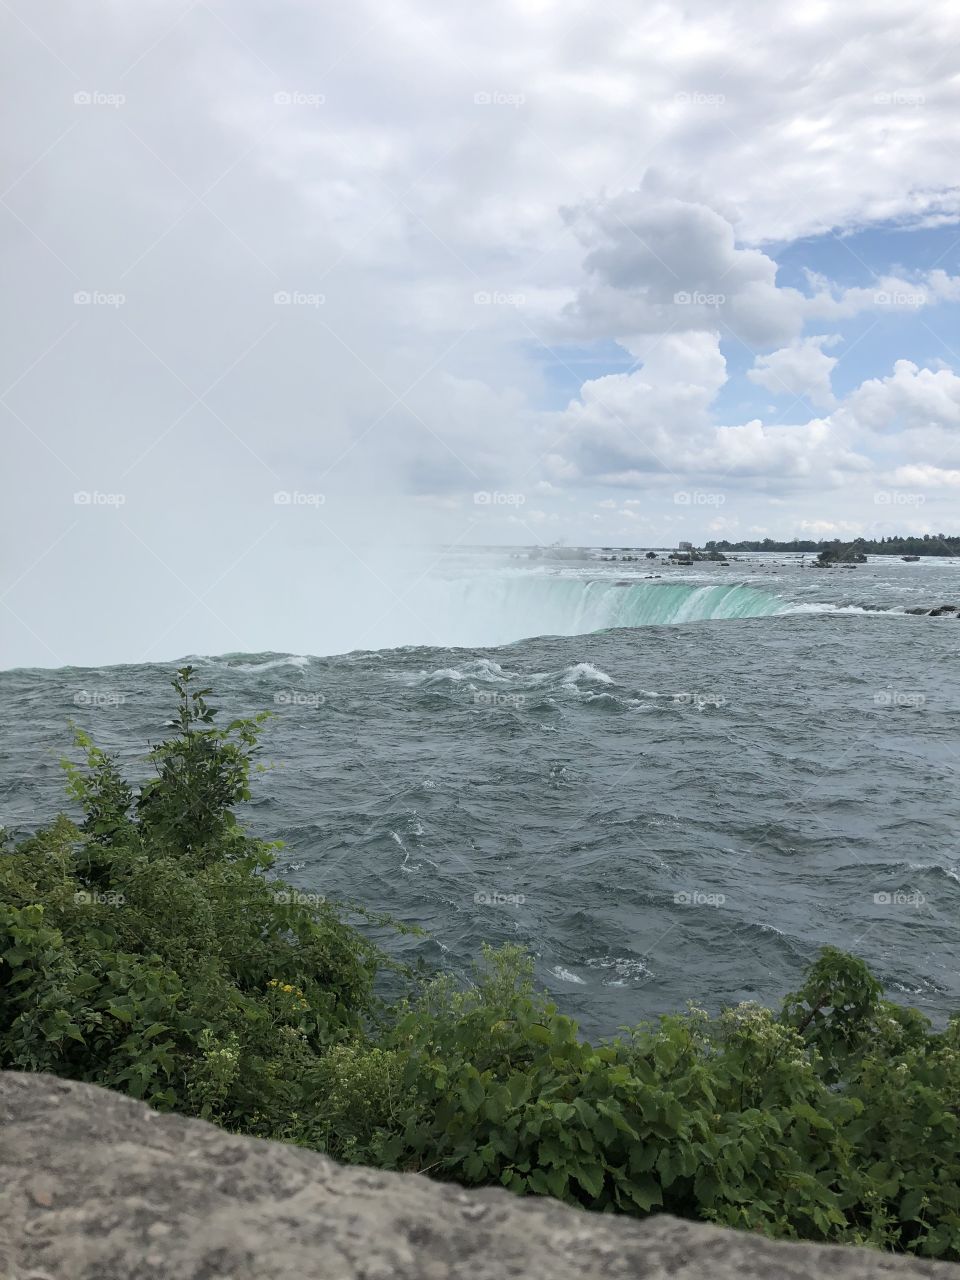 A view of the Canadian side of the Niagra Falls!